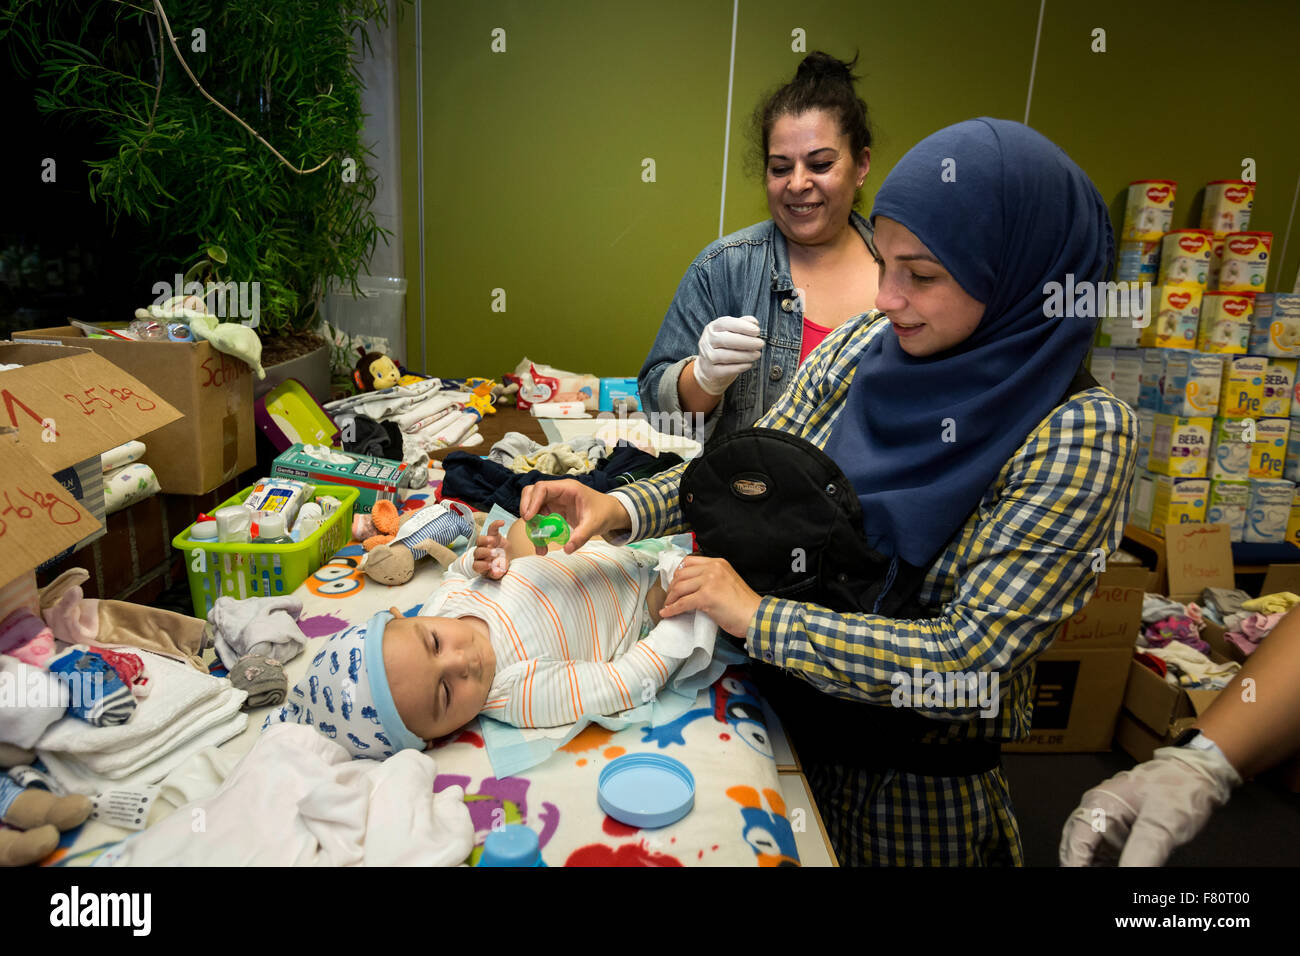 In the refugee arrival in Dortmund Keuning house the refugees of volunteers are supplied with food and clothing. Stock Photo